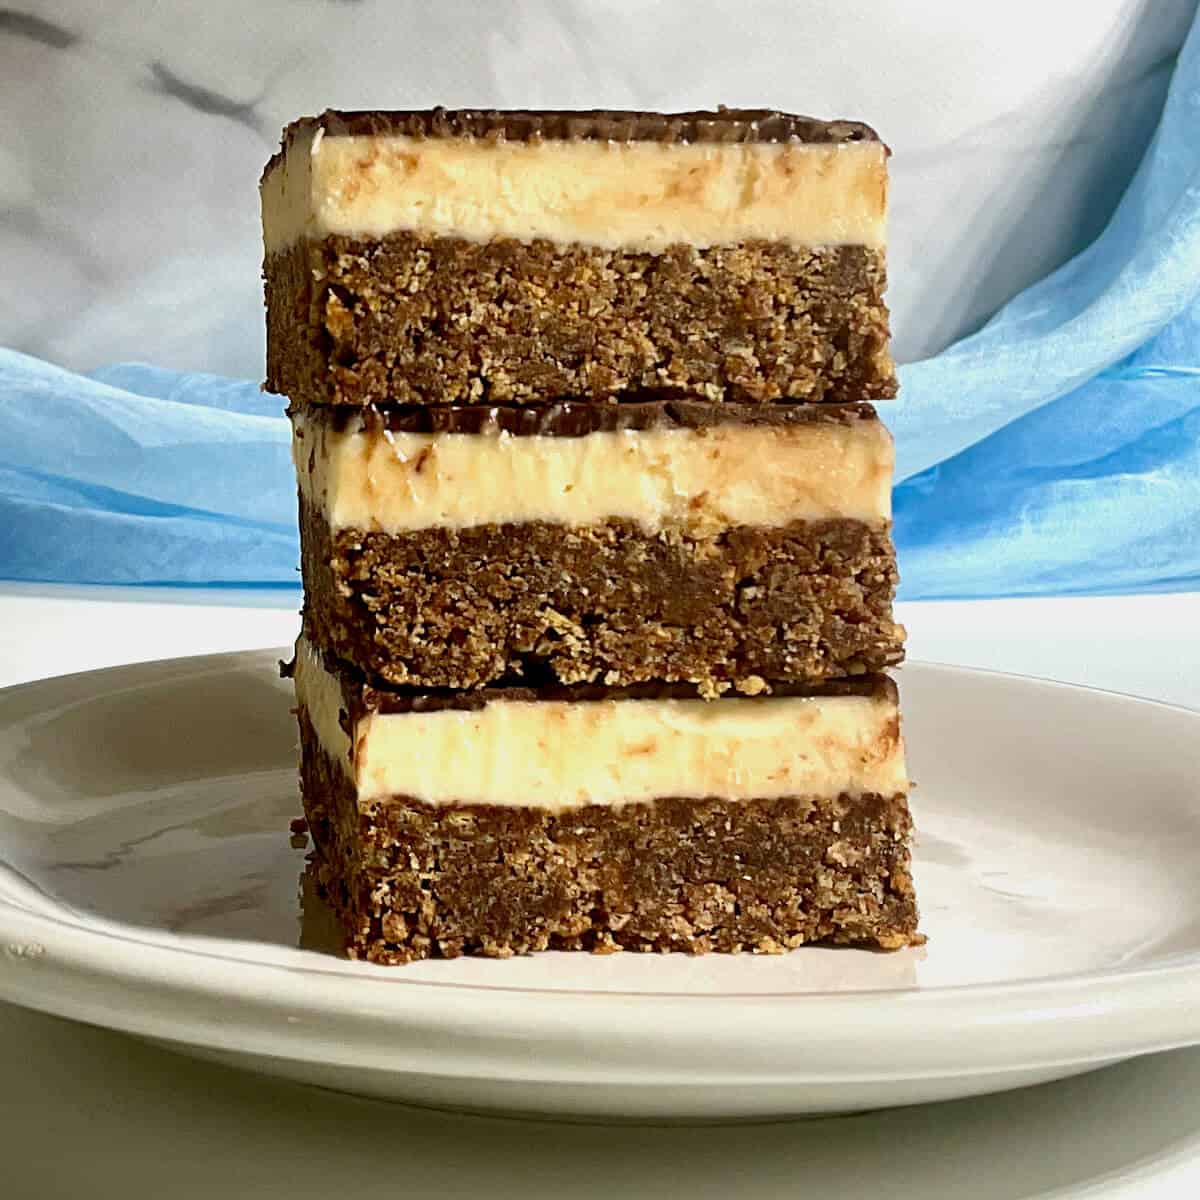 Nanaimo bars stacked on a white plate in front of a blue draped scarf.